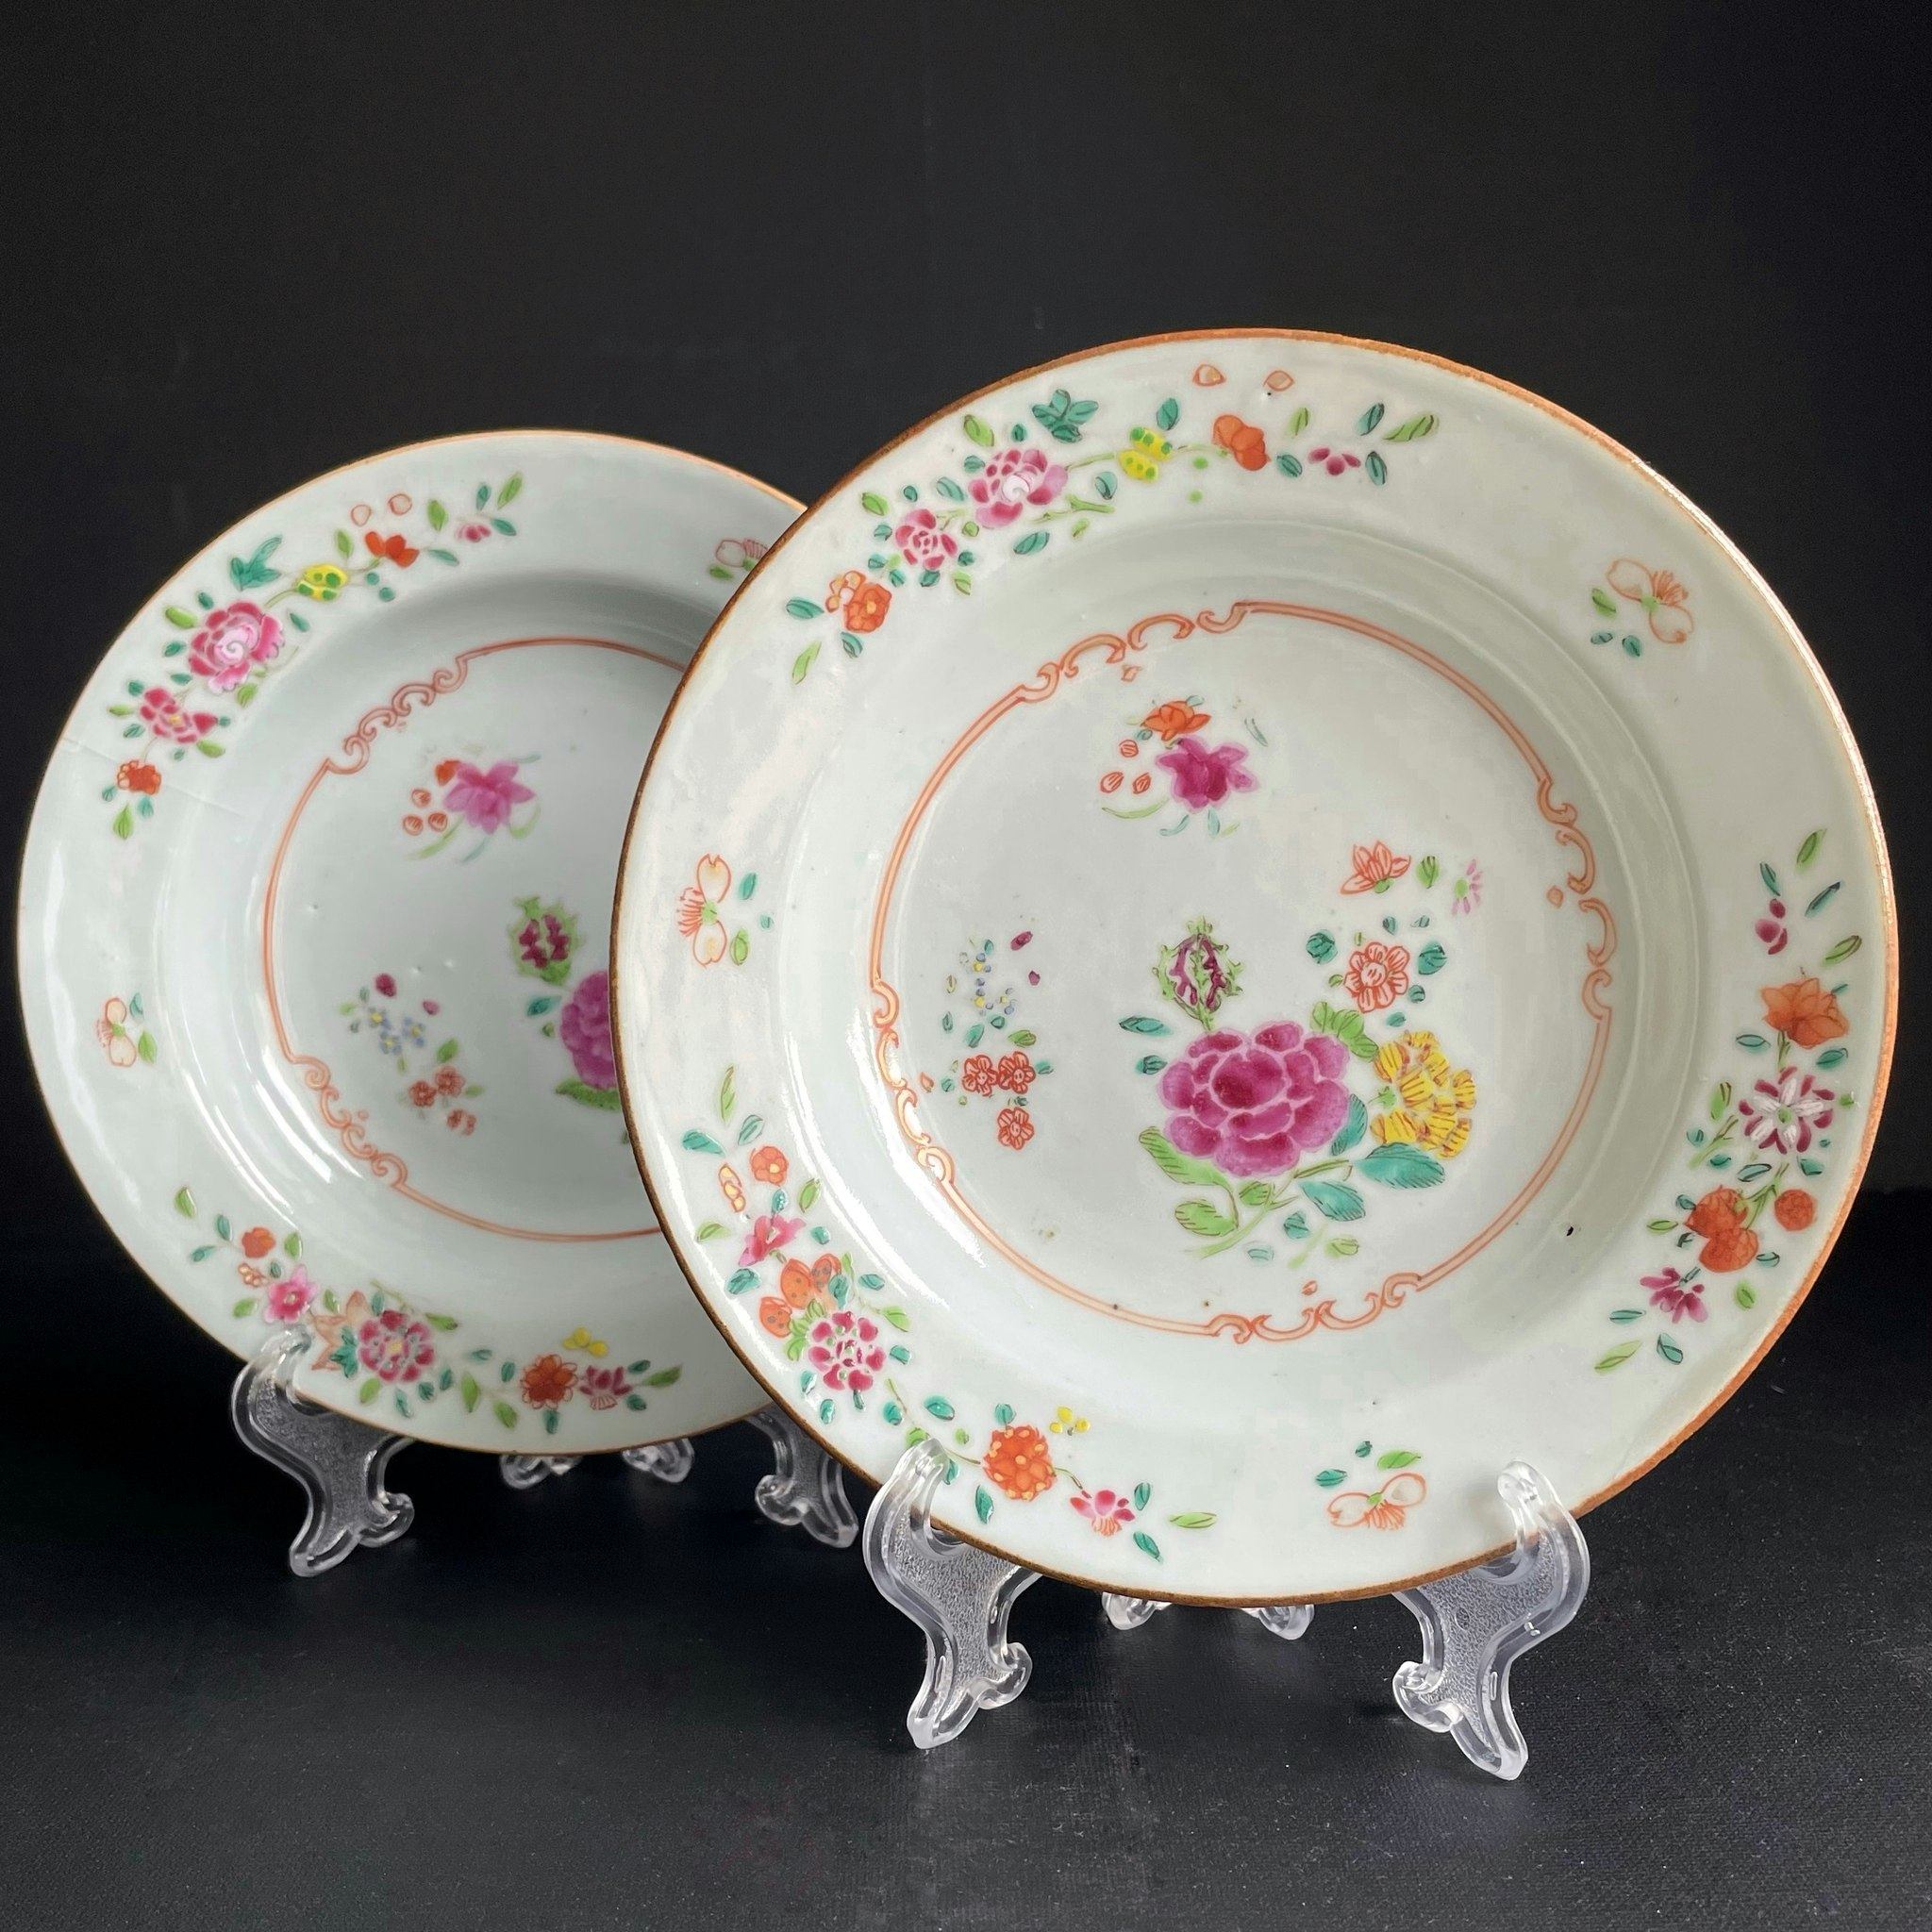 Antique pair of Chinese Famille Rose deep dishes, Qianlong #1231_1232